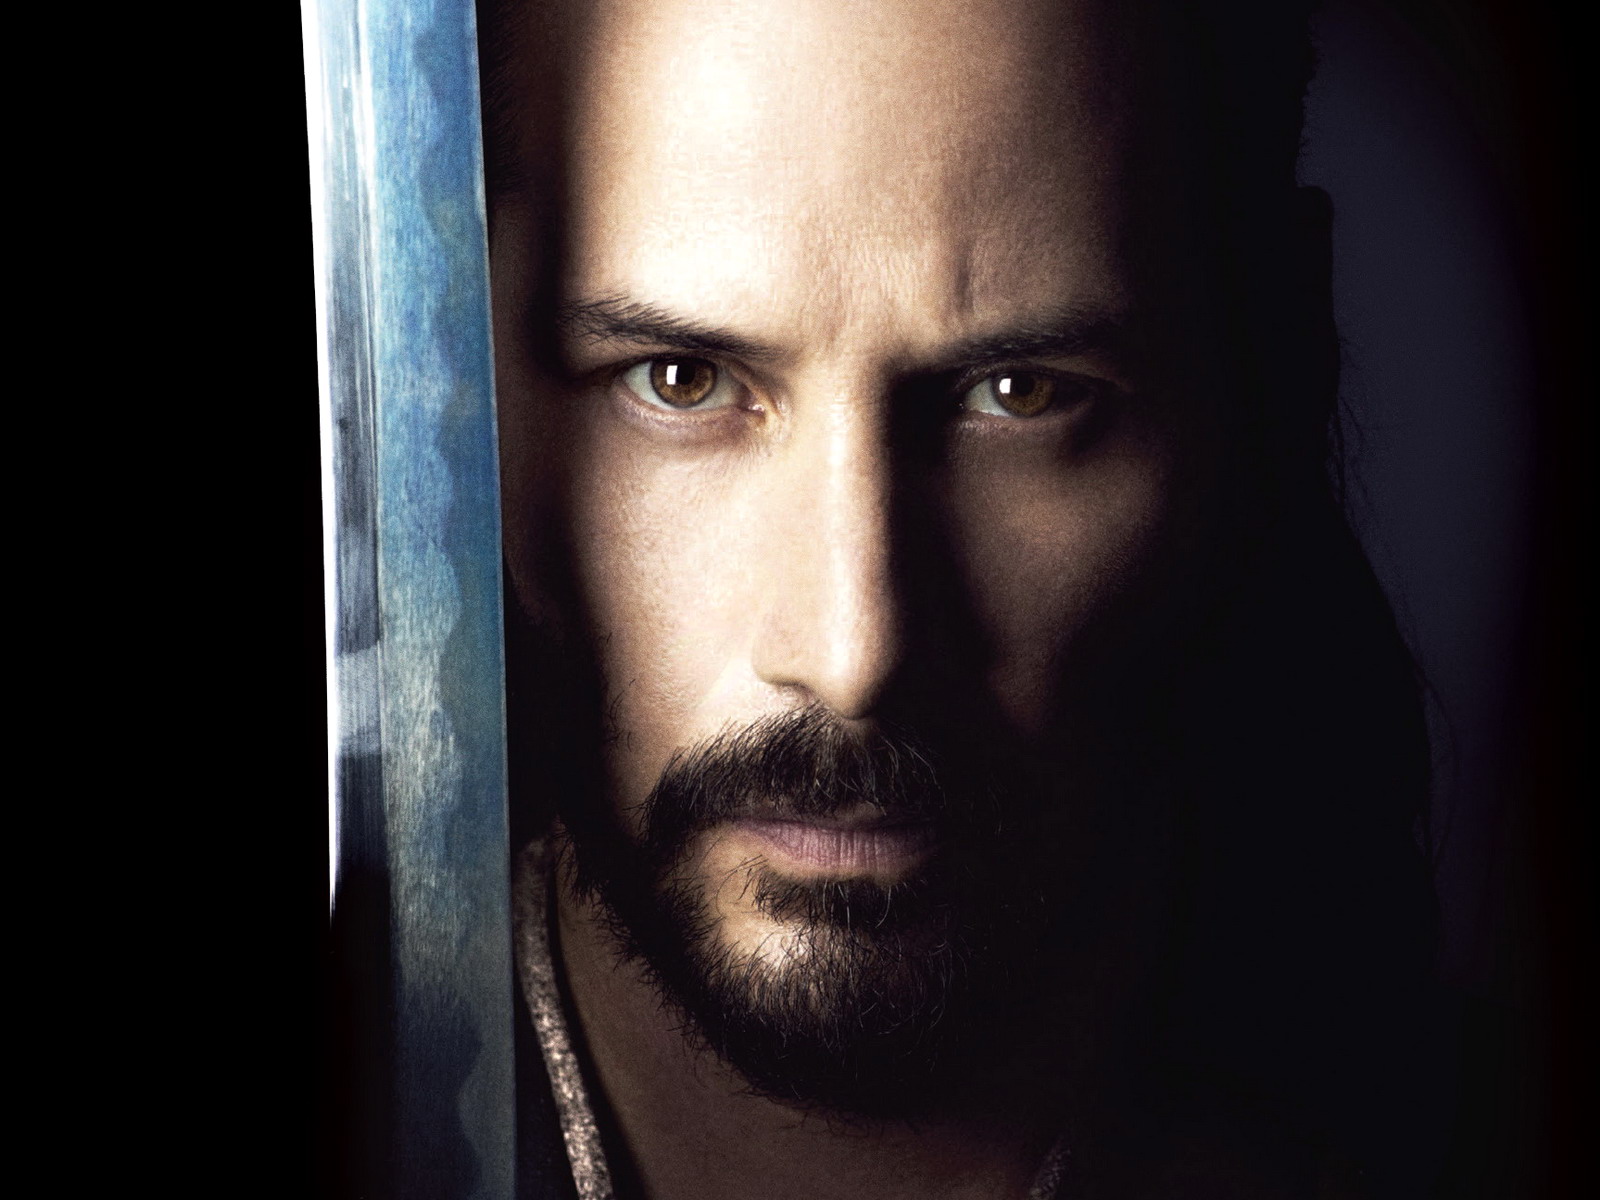 Download High quality 47 Ronin wallpaper / Movies / 1600x1200